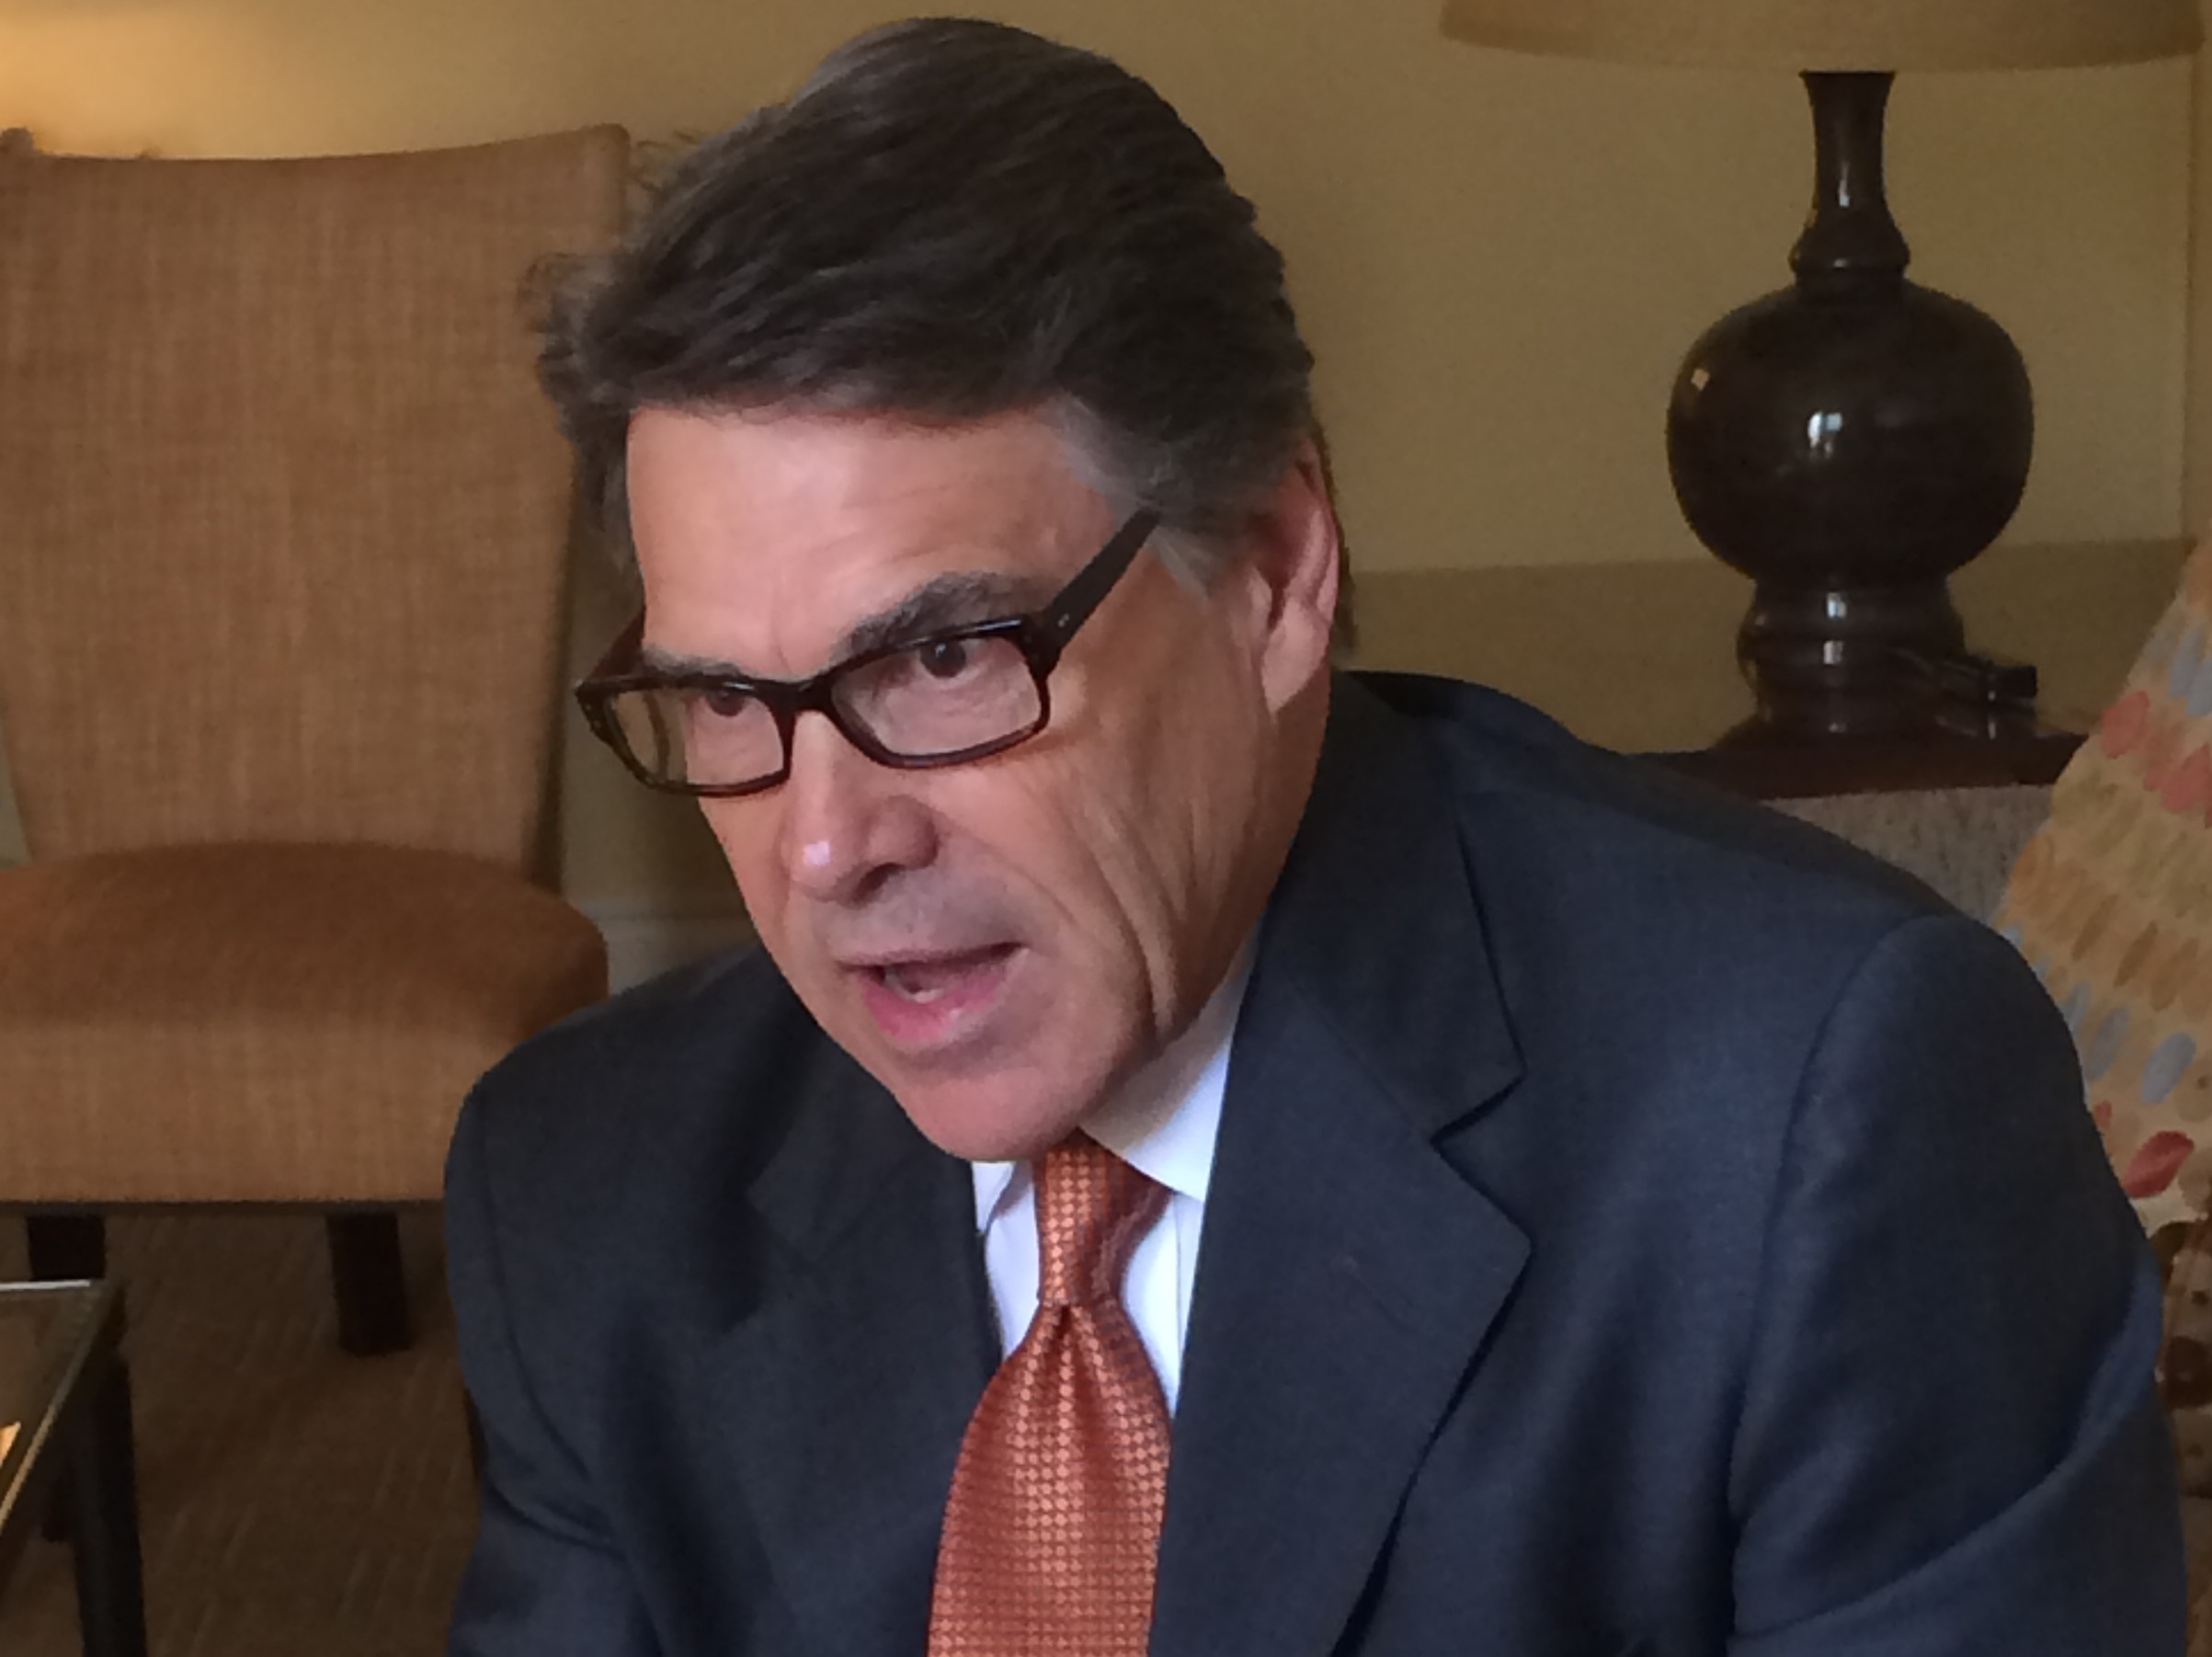 Rick Perry: We've Warned Feds About Warehoused Children Since 2012